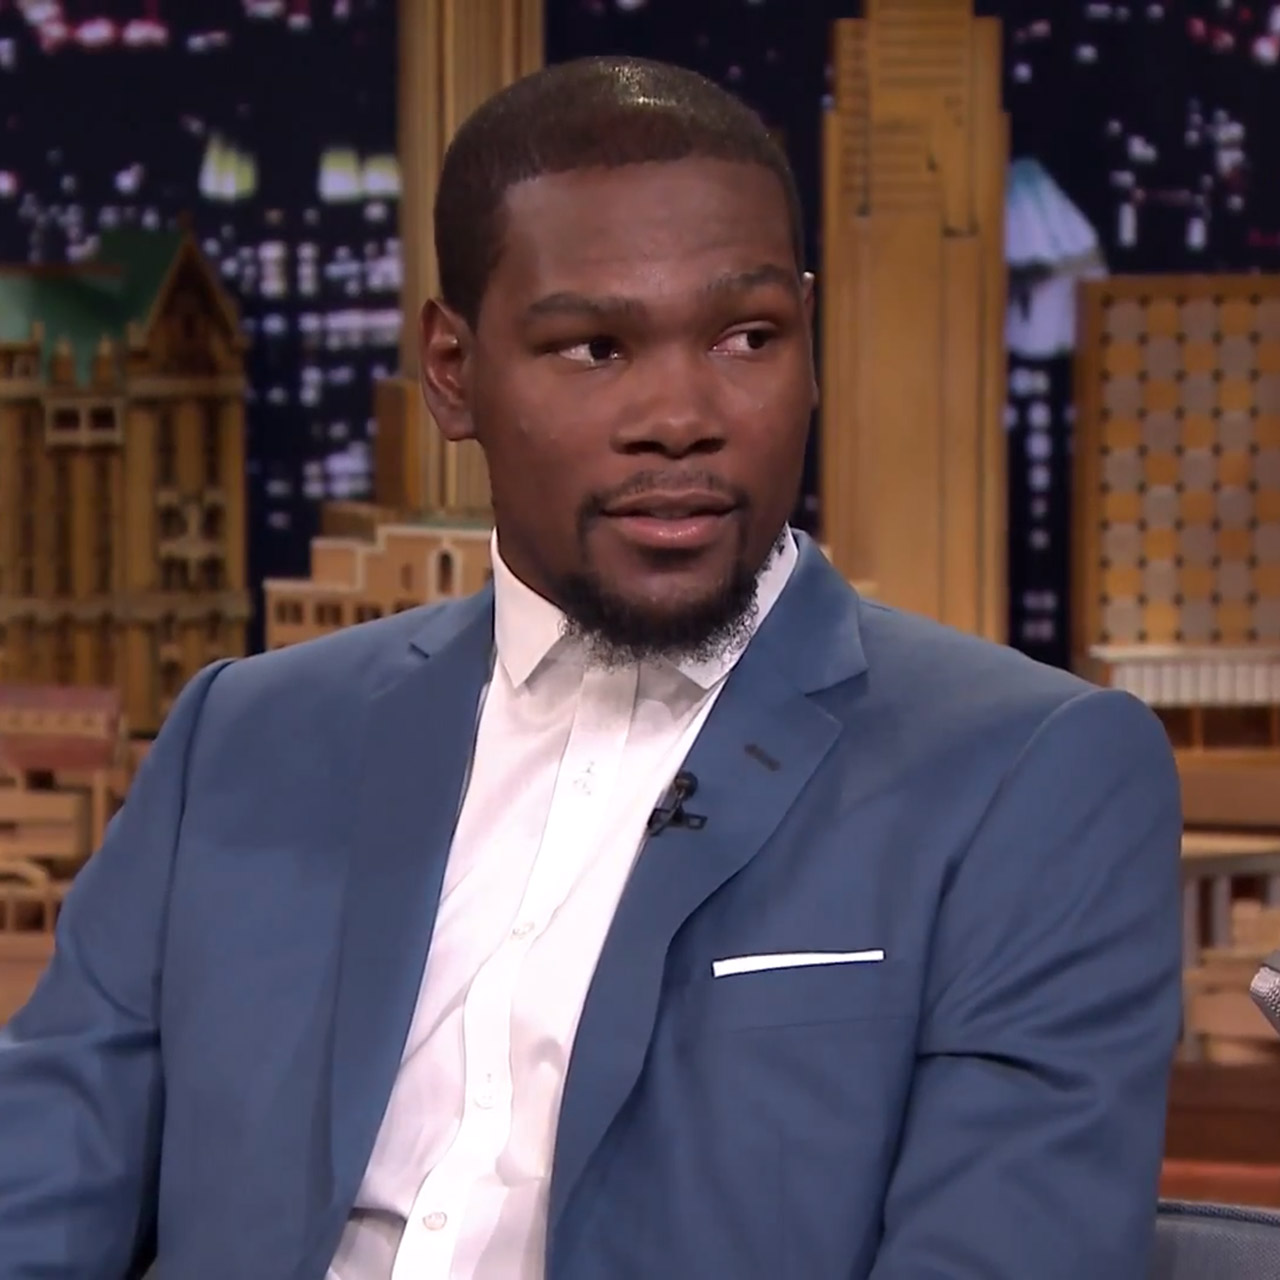 Kevin Durant on The Tonight Show starring Jimmy Fallon